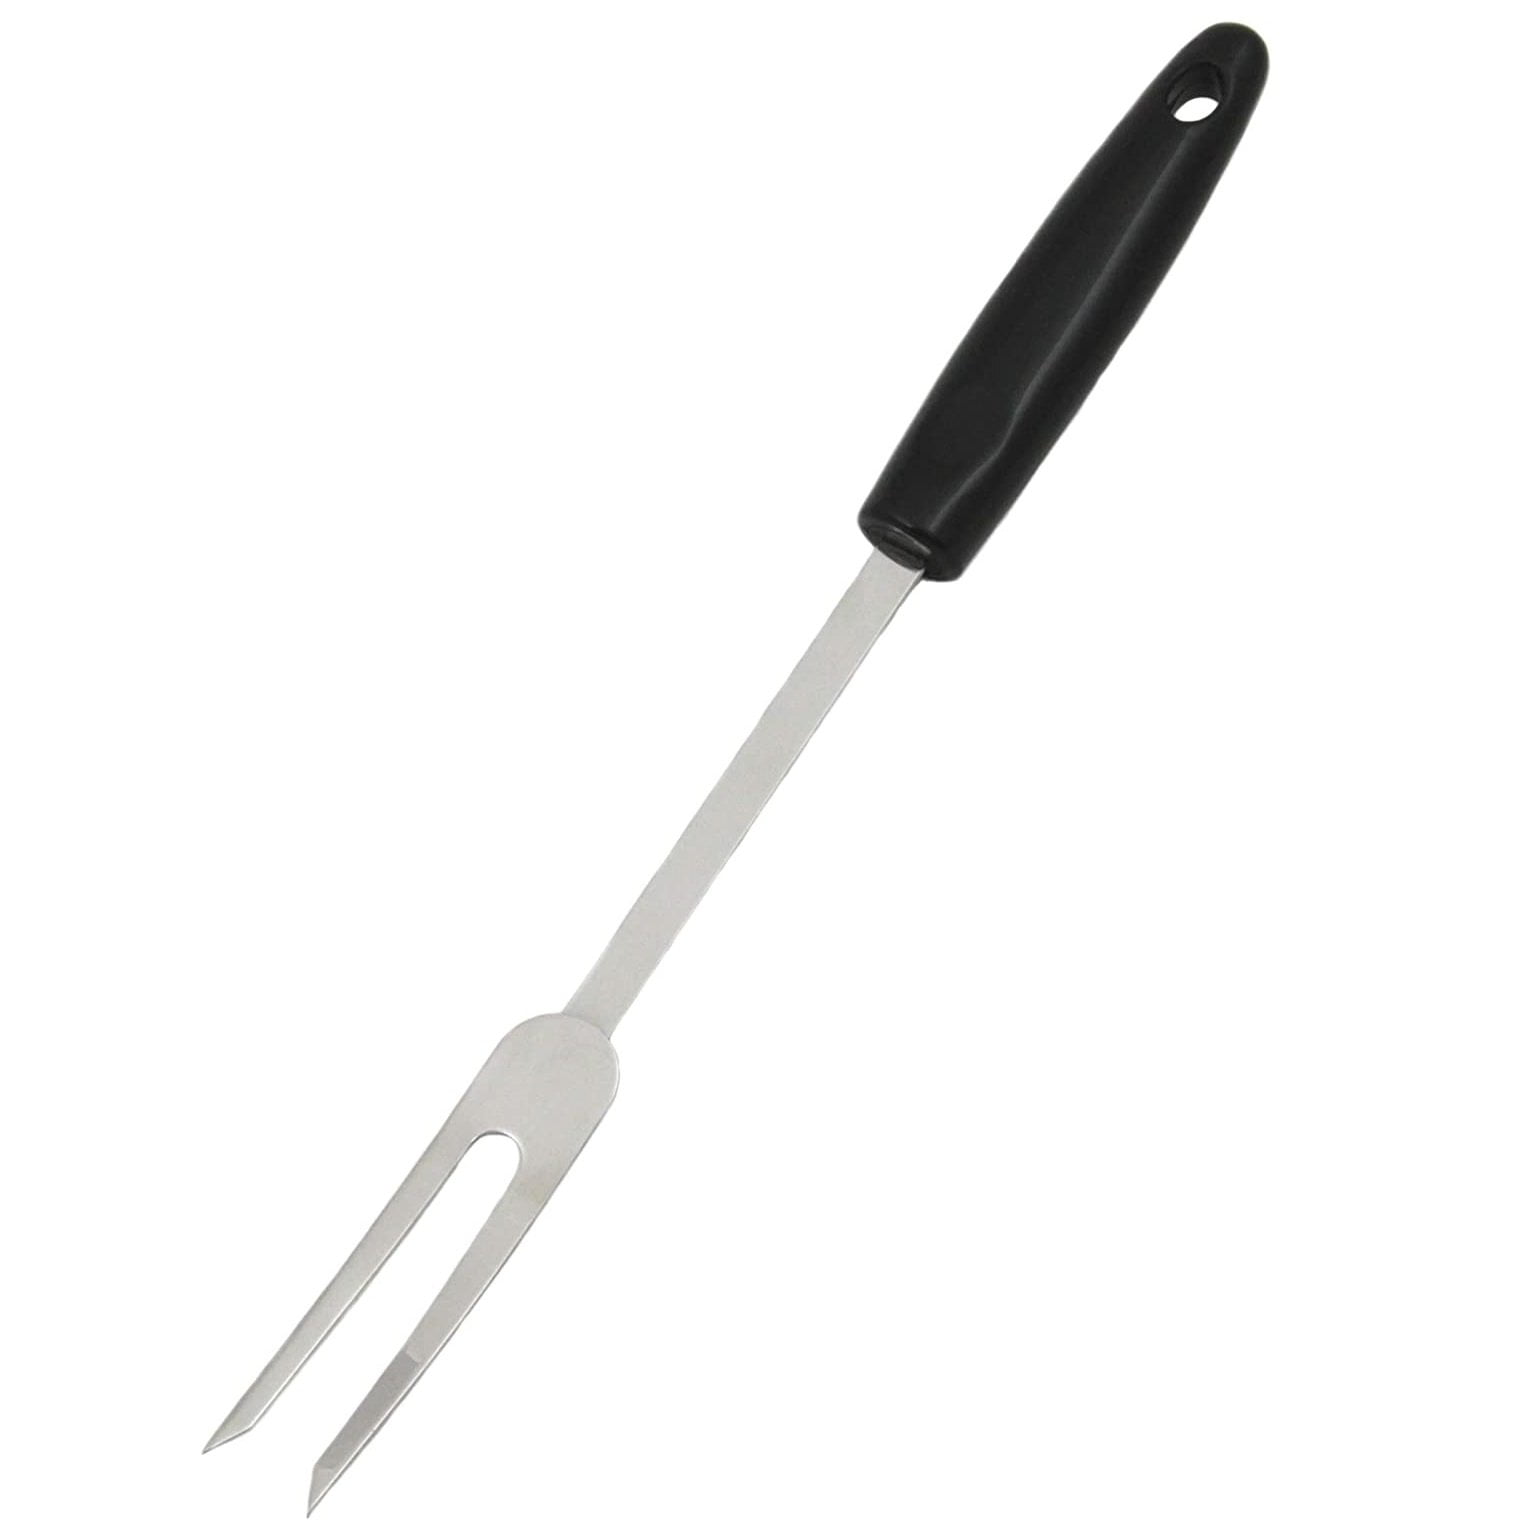  Chef Craft Select Meat and Potato Fork, 9.25 inch